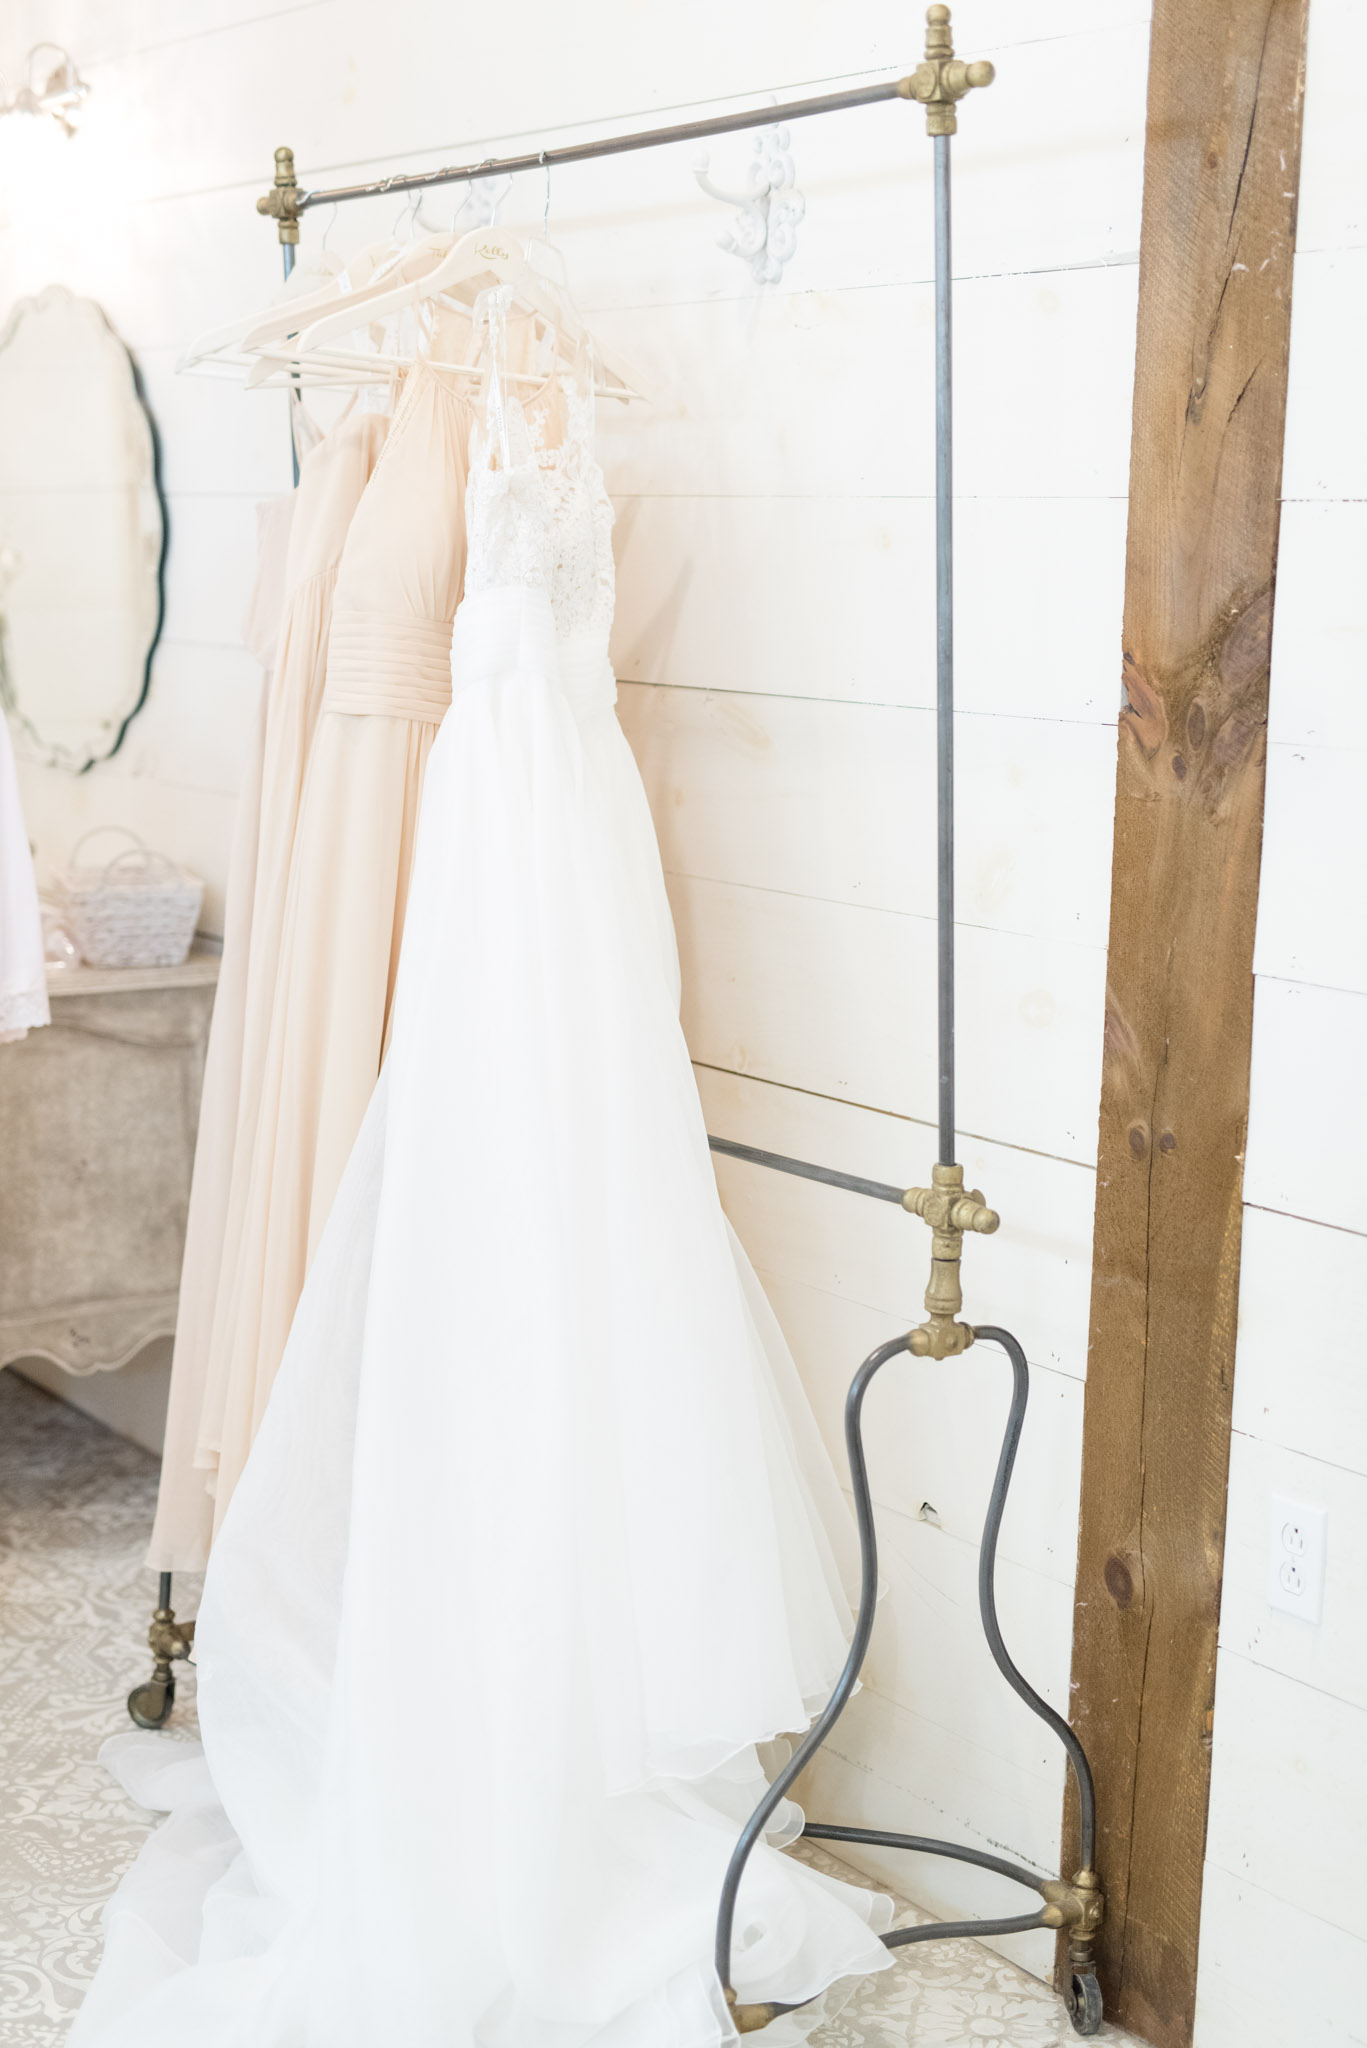 Bride and bridesmaids dresses hang together.